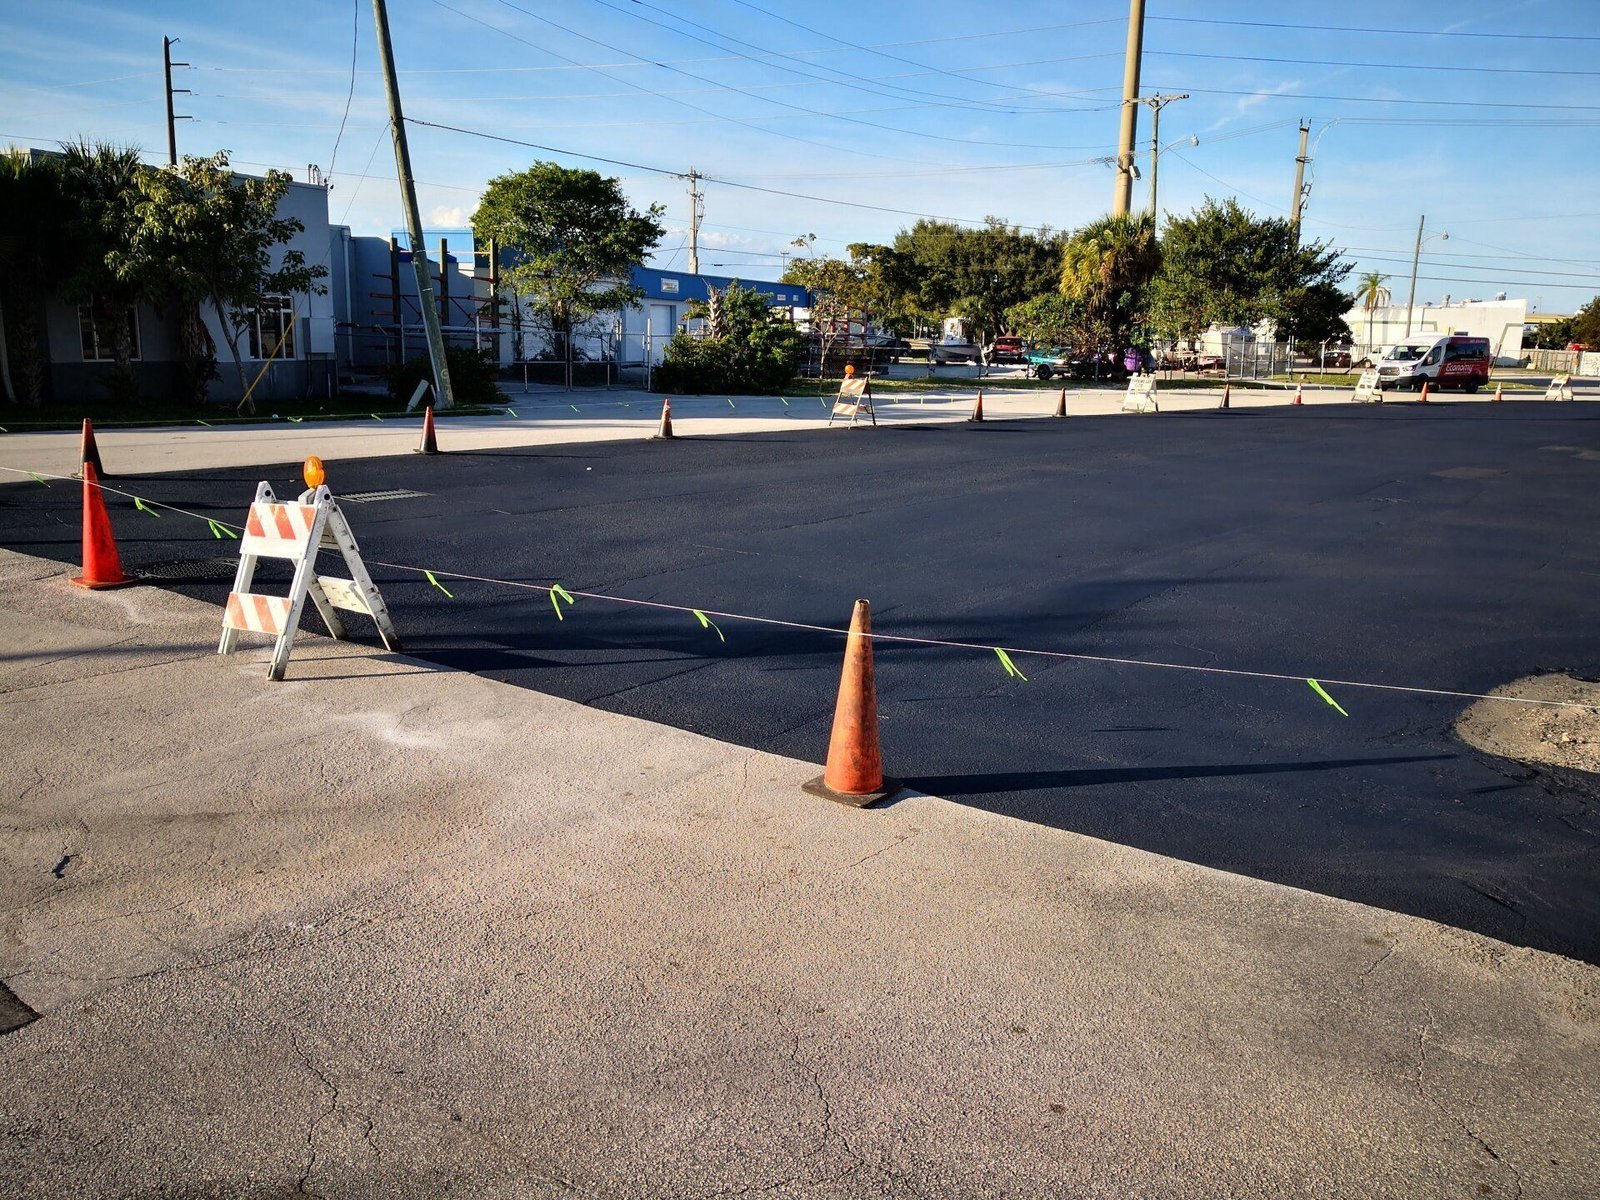 The asphalt parking lot is resurfaced to help extend the life of the space